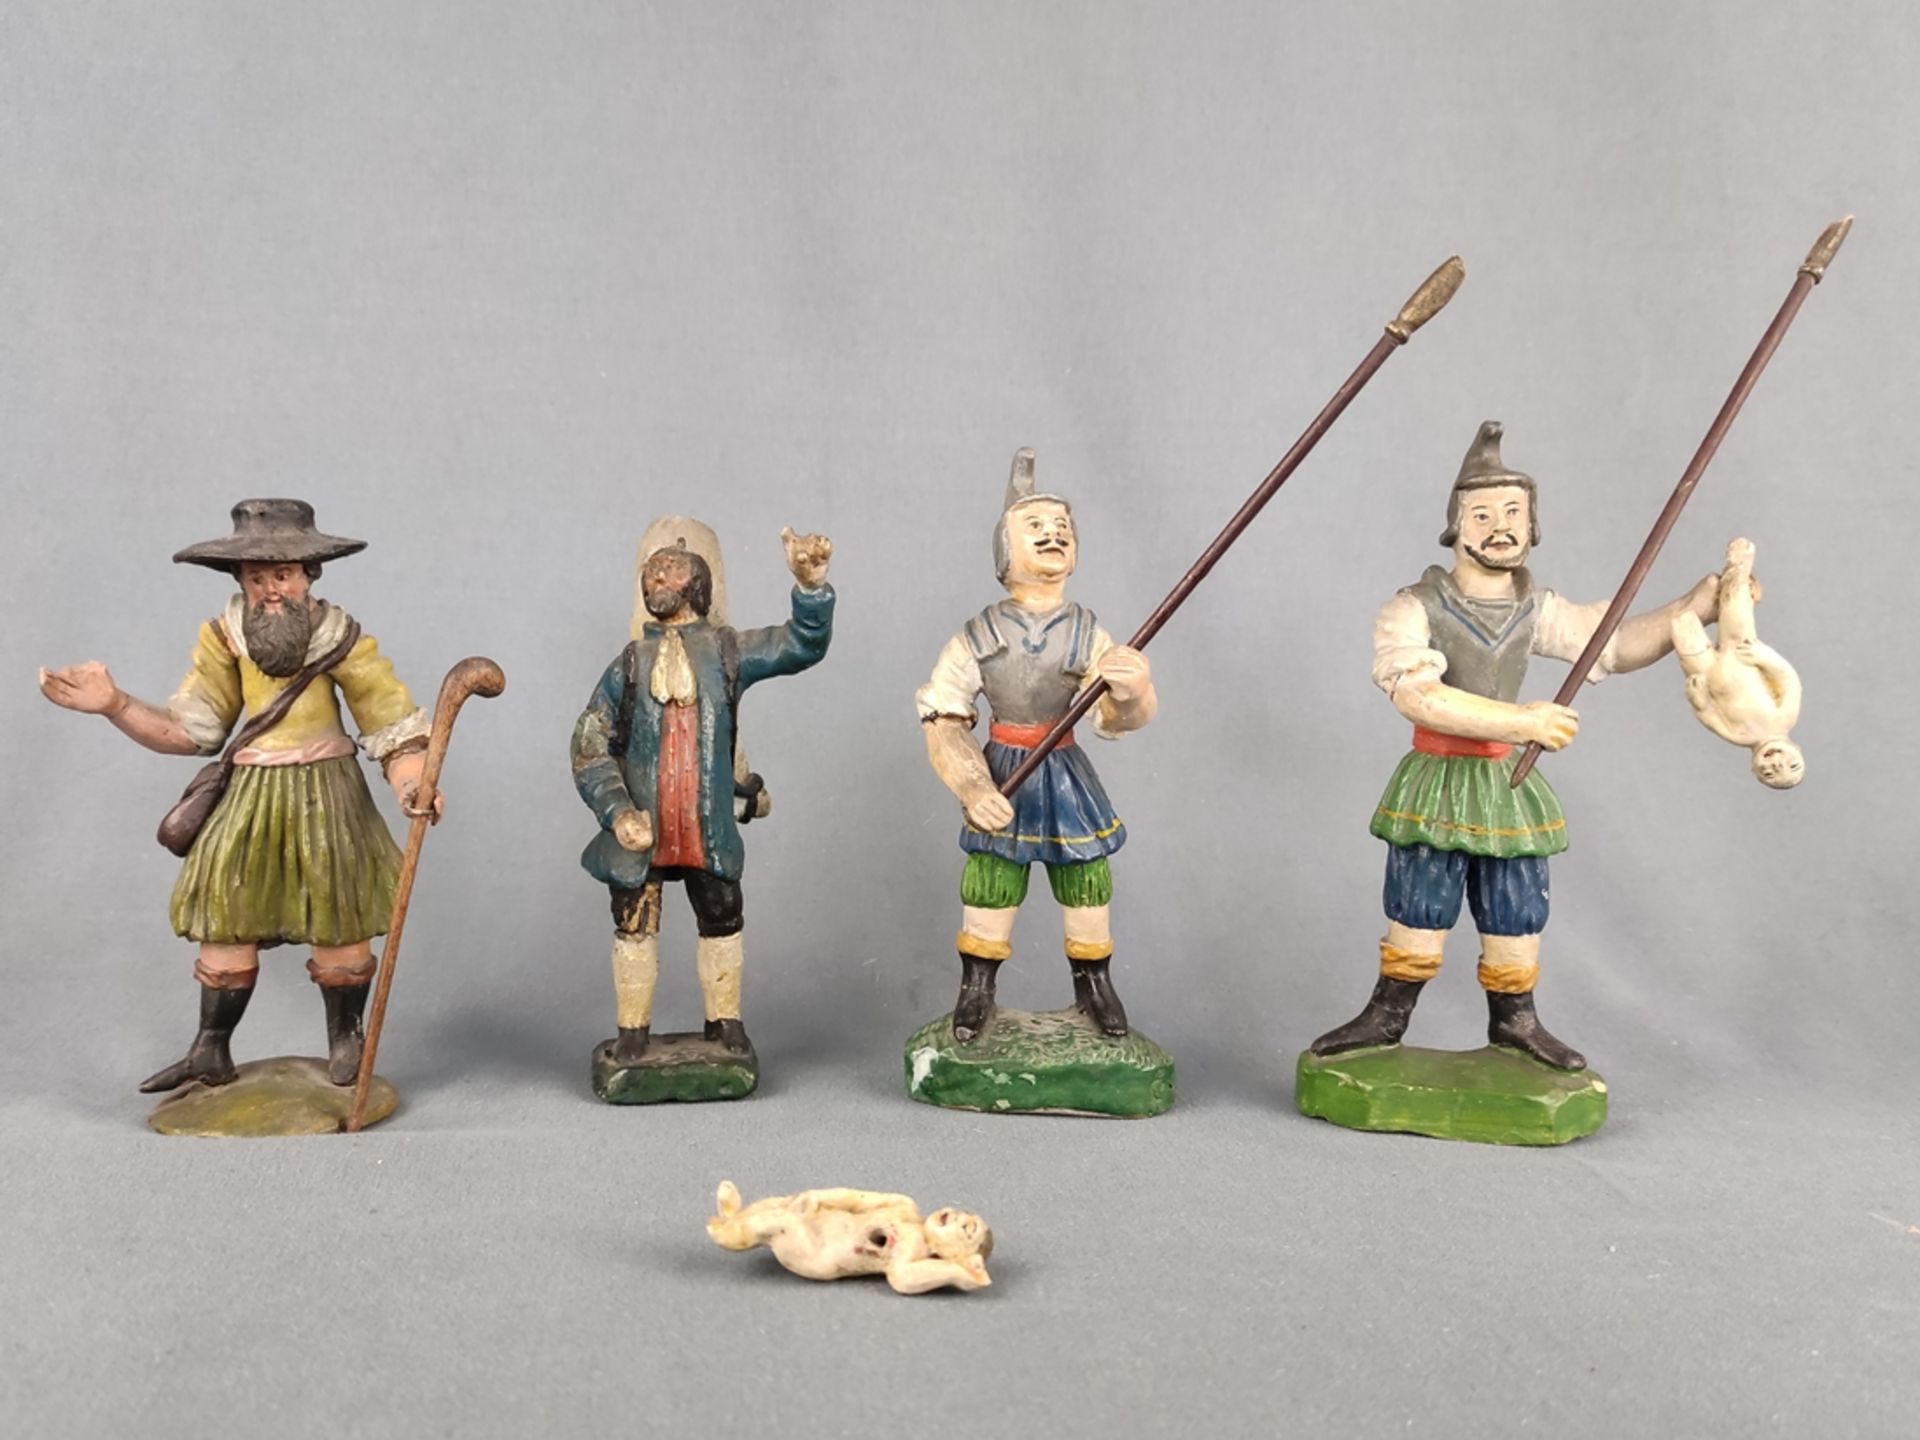 15 figurines, 19th century, terracotta, colourfully painted, one signed on base J: Göth., height of - Image 3 of 7